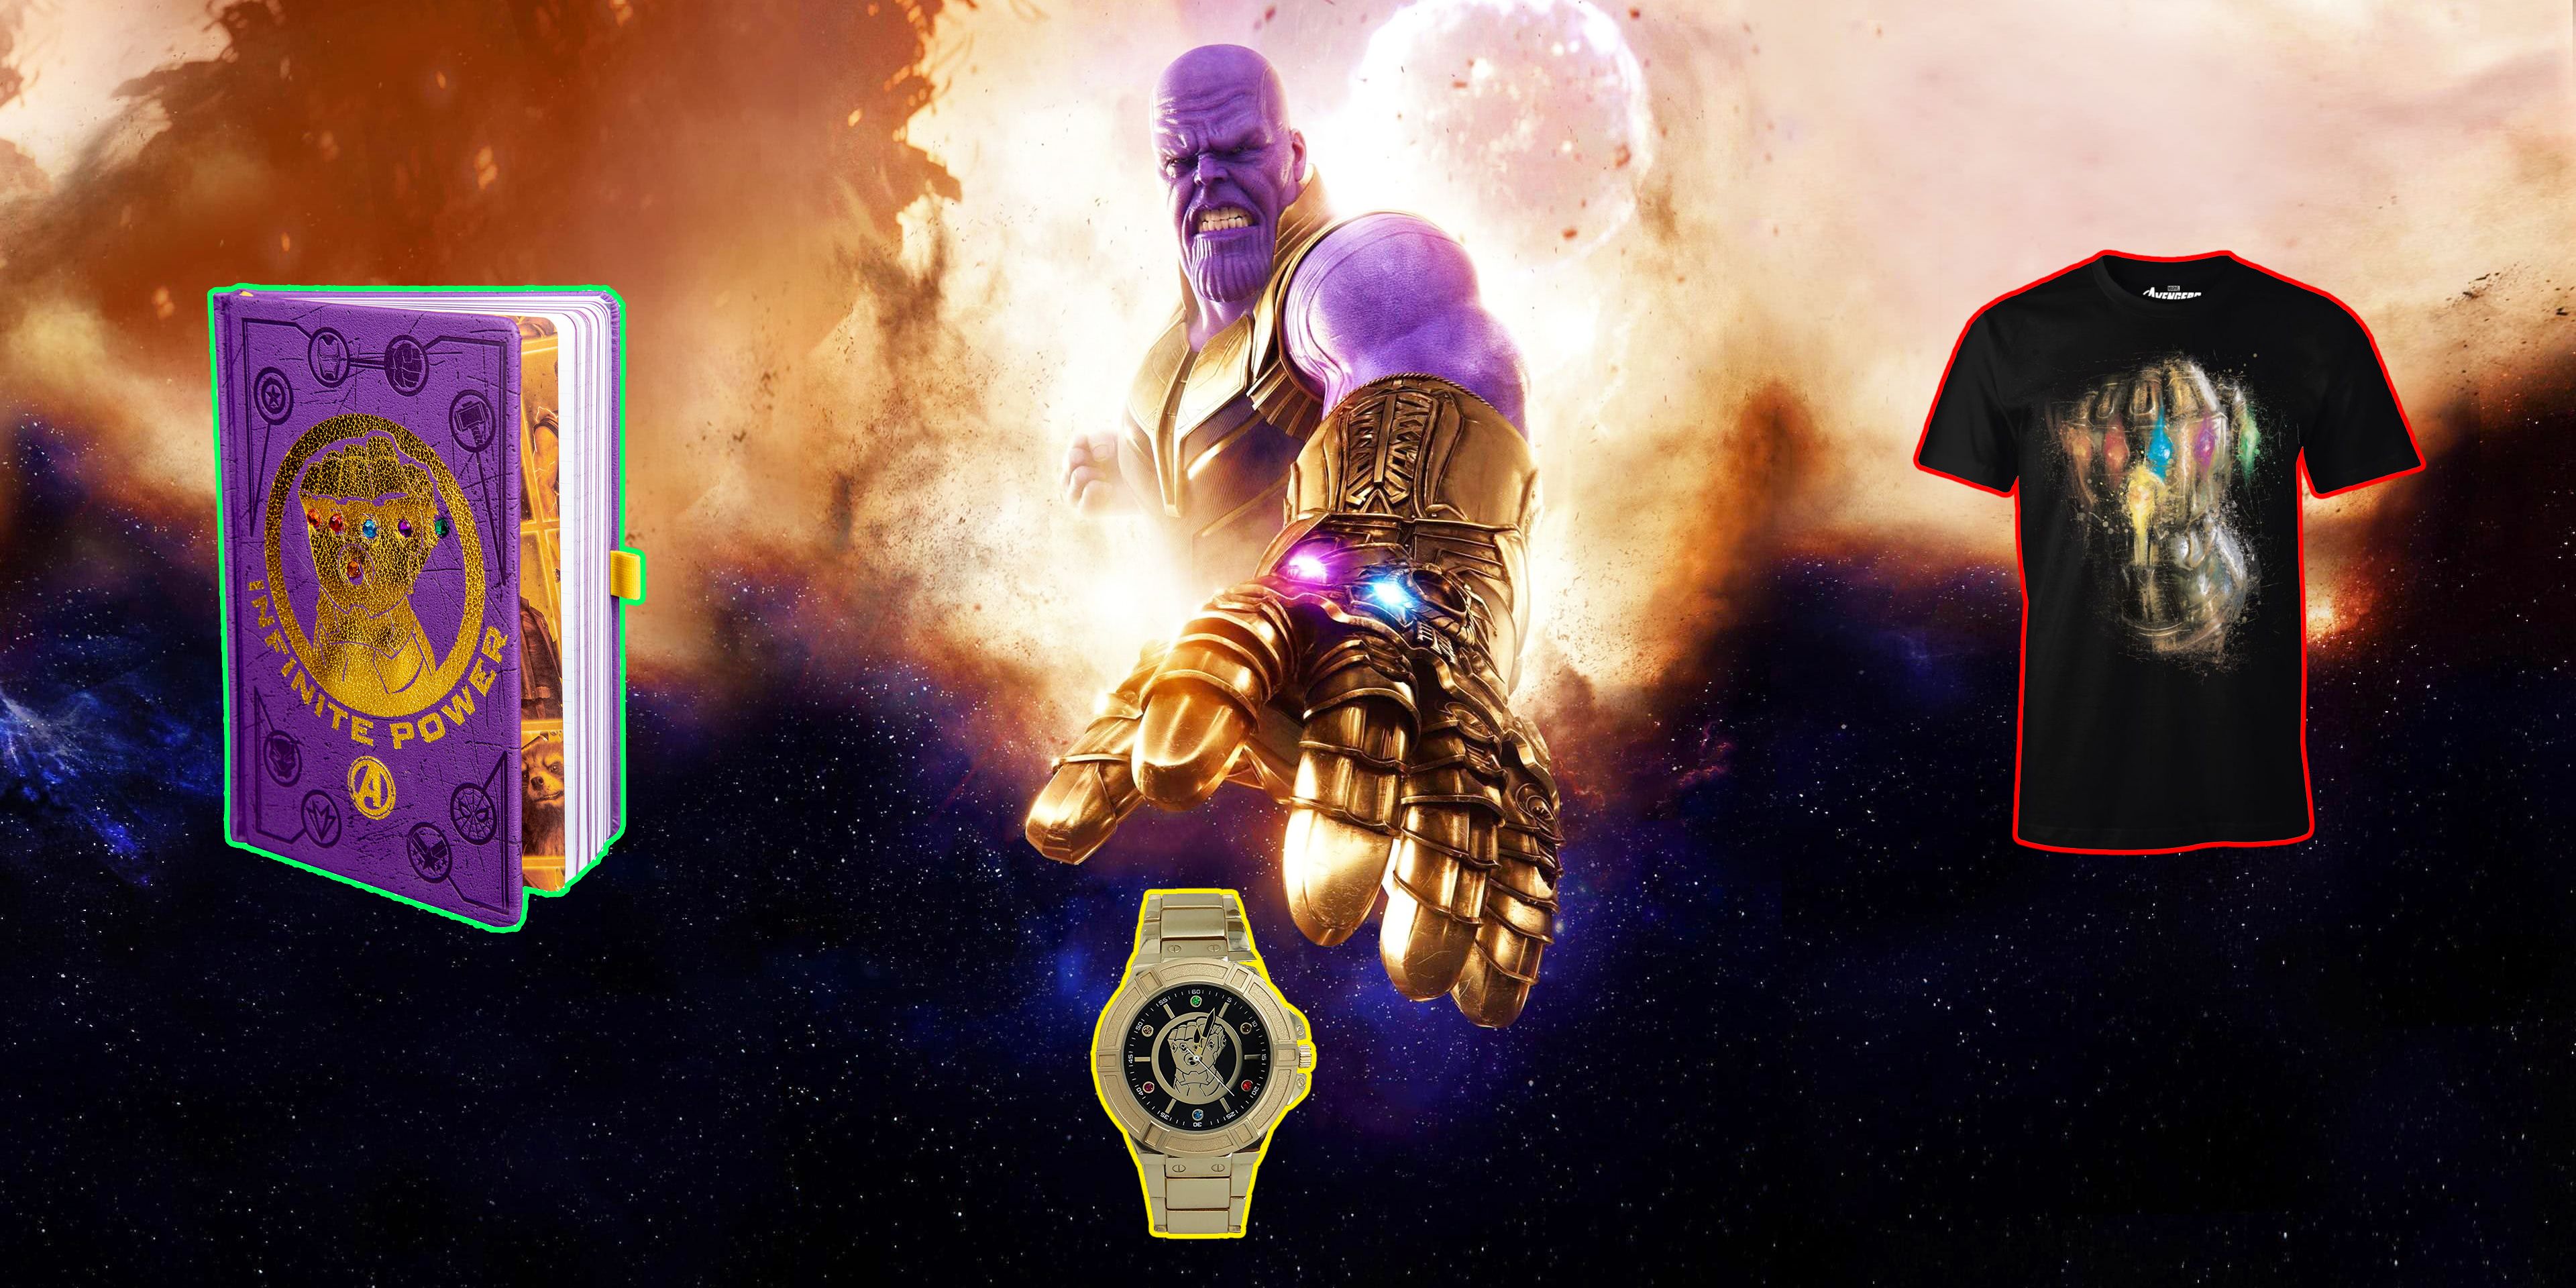 The 10 Best Infinity Gauntlet Products Ranked